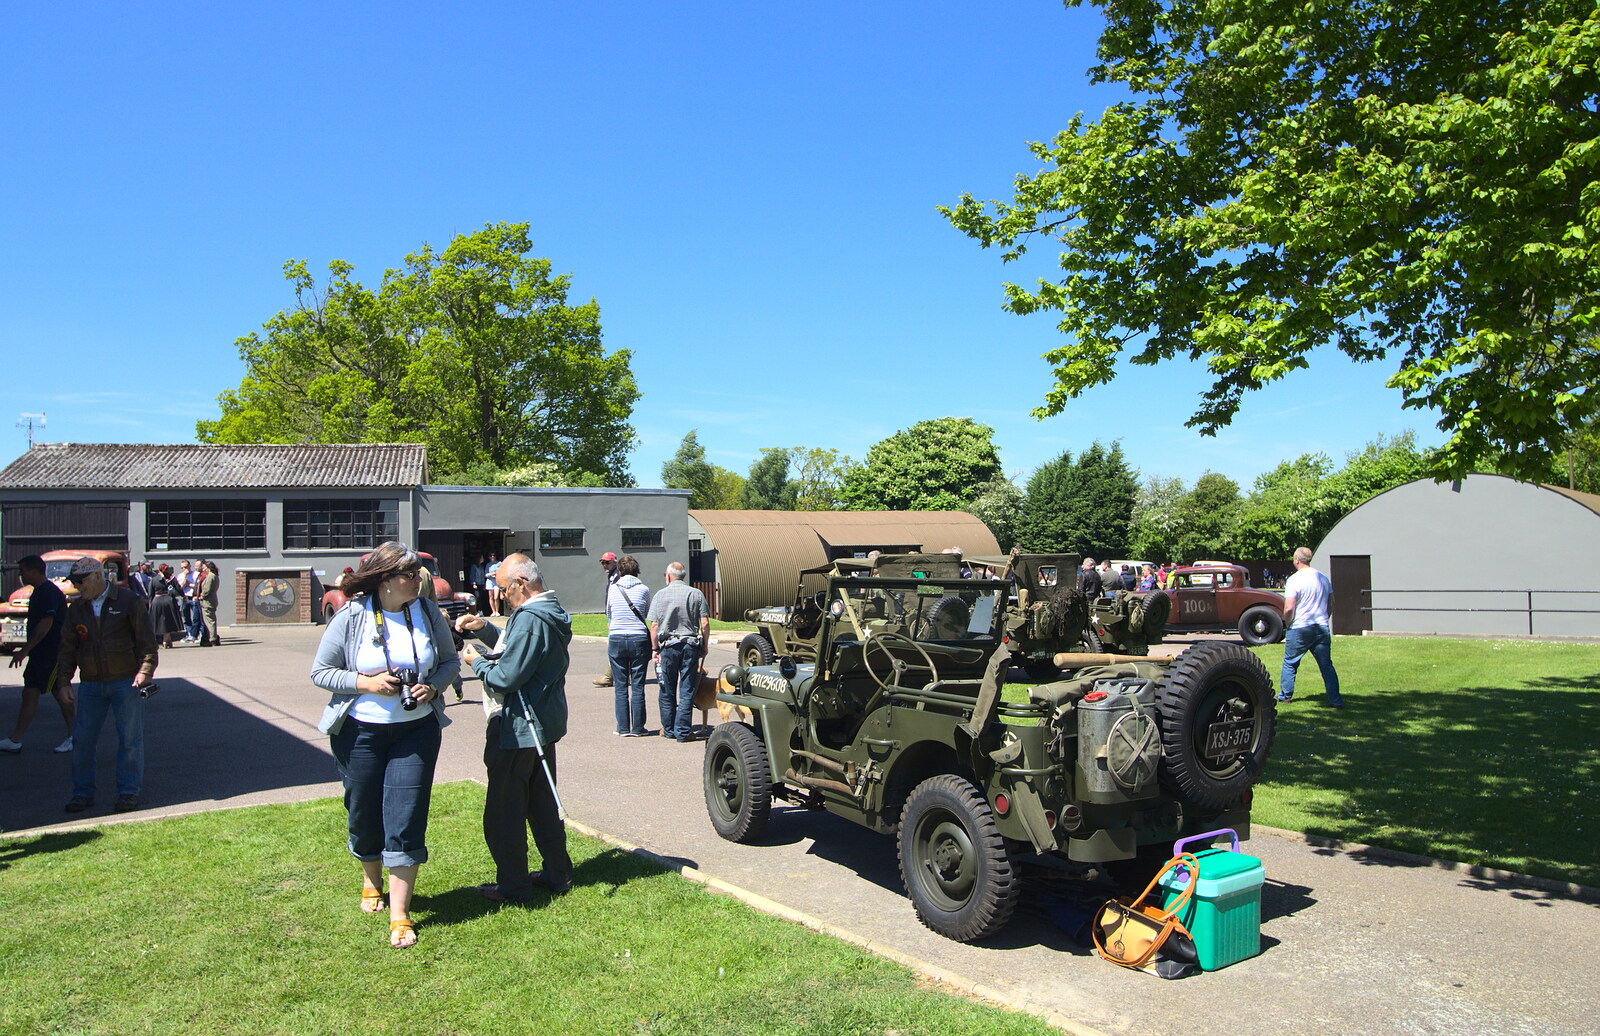 The scene at Thorpe Abbots from A "Sally B" B-17 Flypast, Thorpe Abbots, Norfolk - 27th May 2013